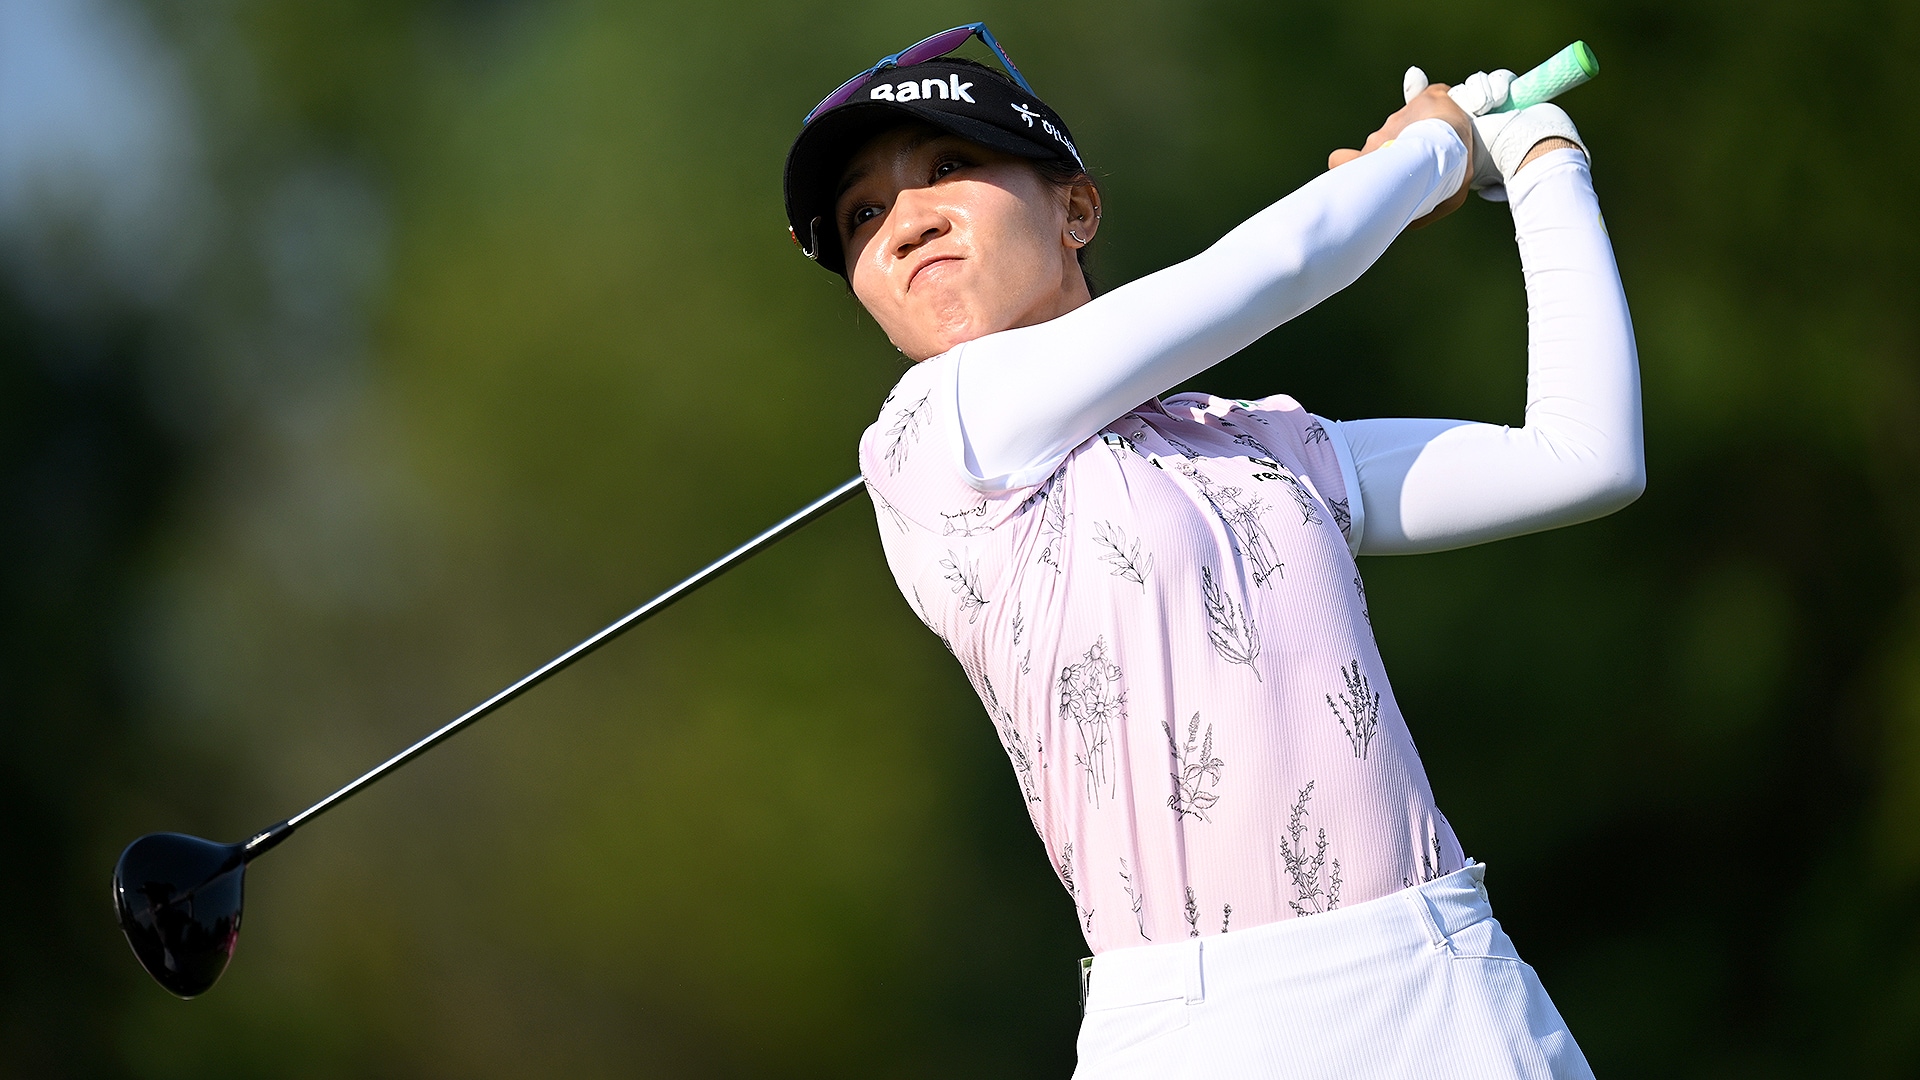 Lydia Ko wins again at Saudi Ladies, earns another big first-place prize